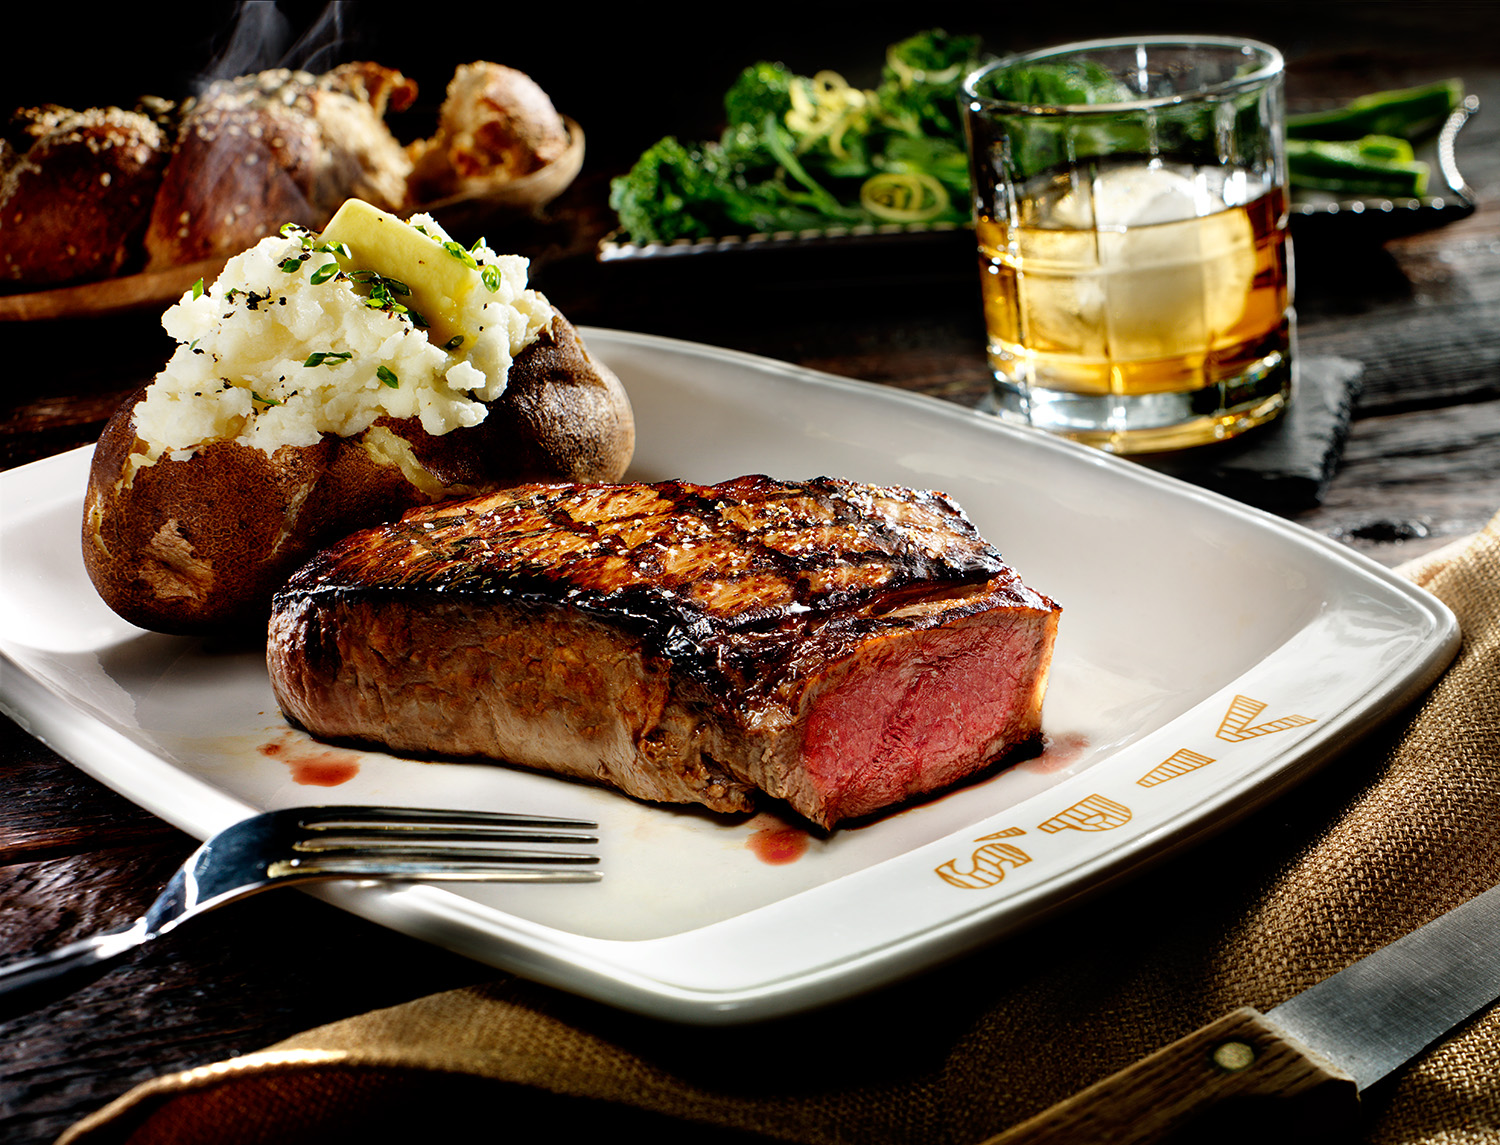 Juicy steak and steaming baked potato steakhouse restaurant dinner on table with food dishes and drink